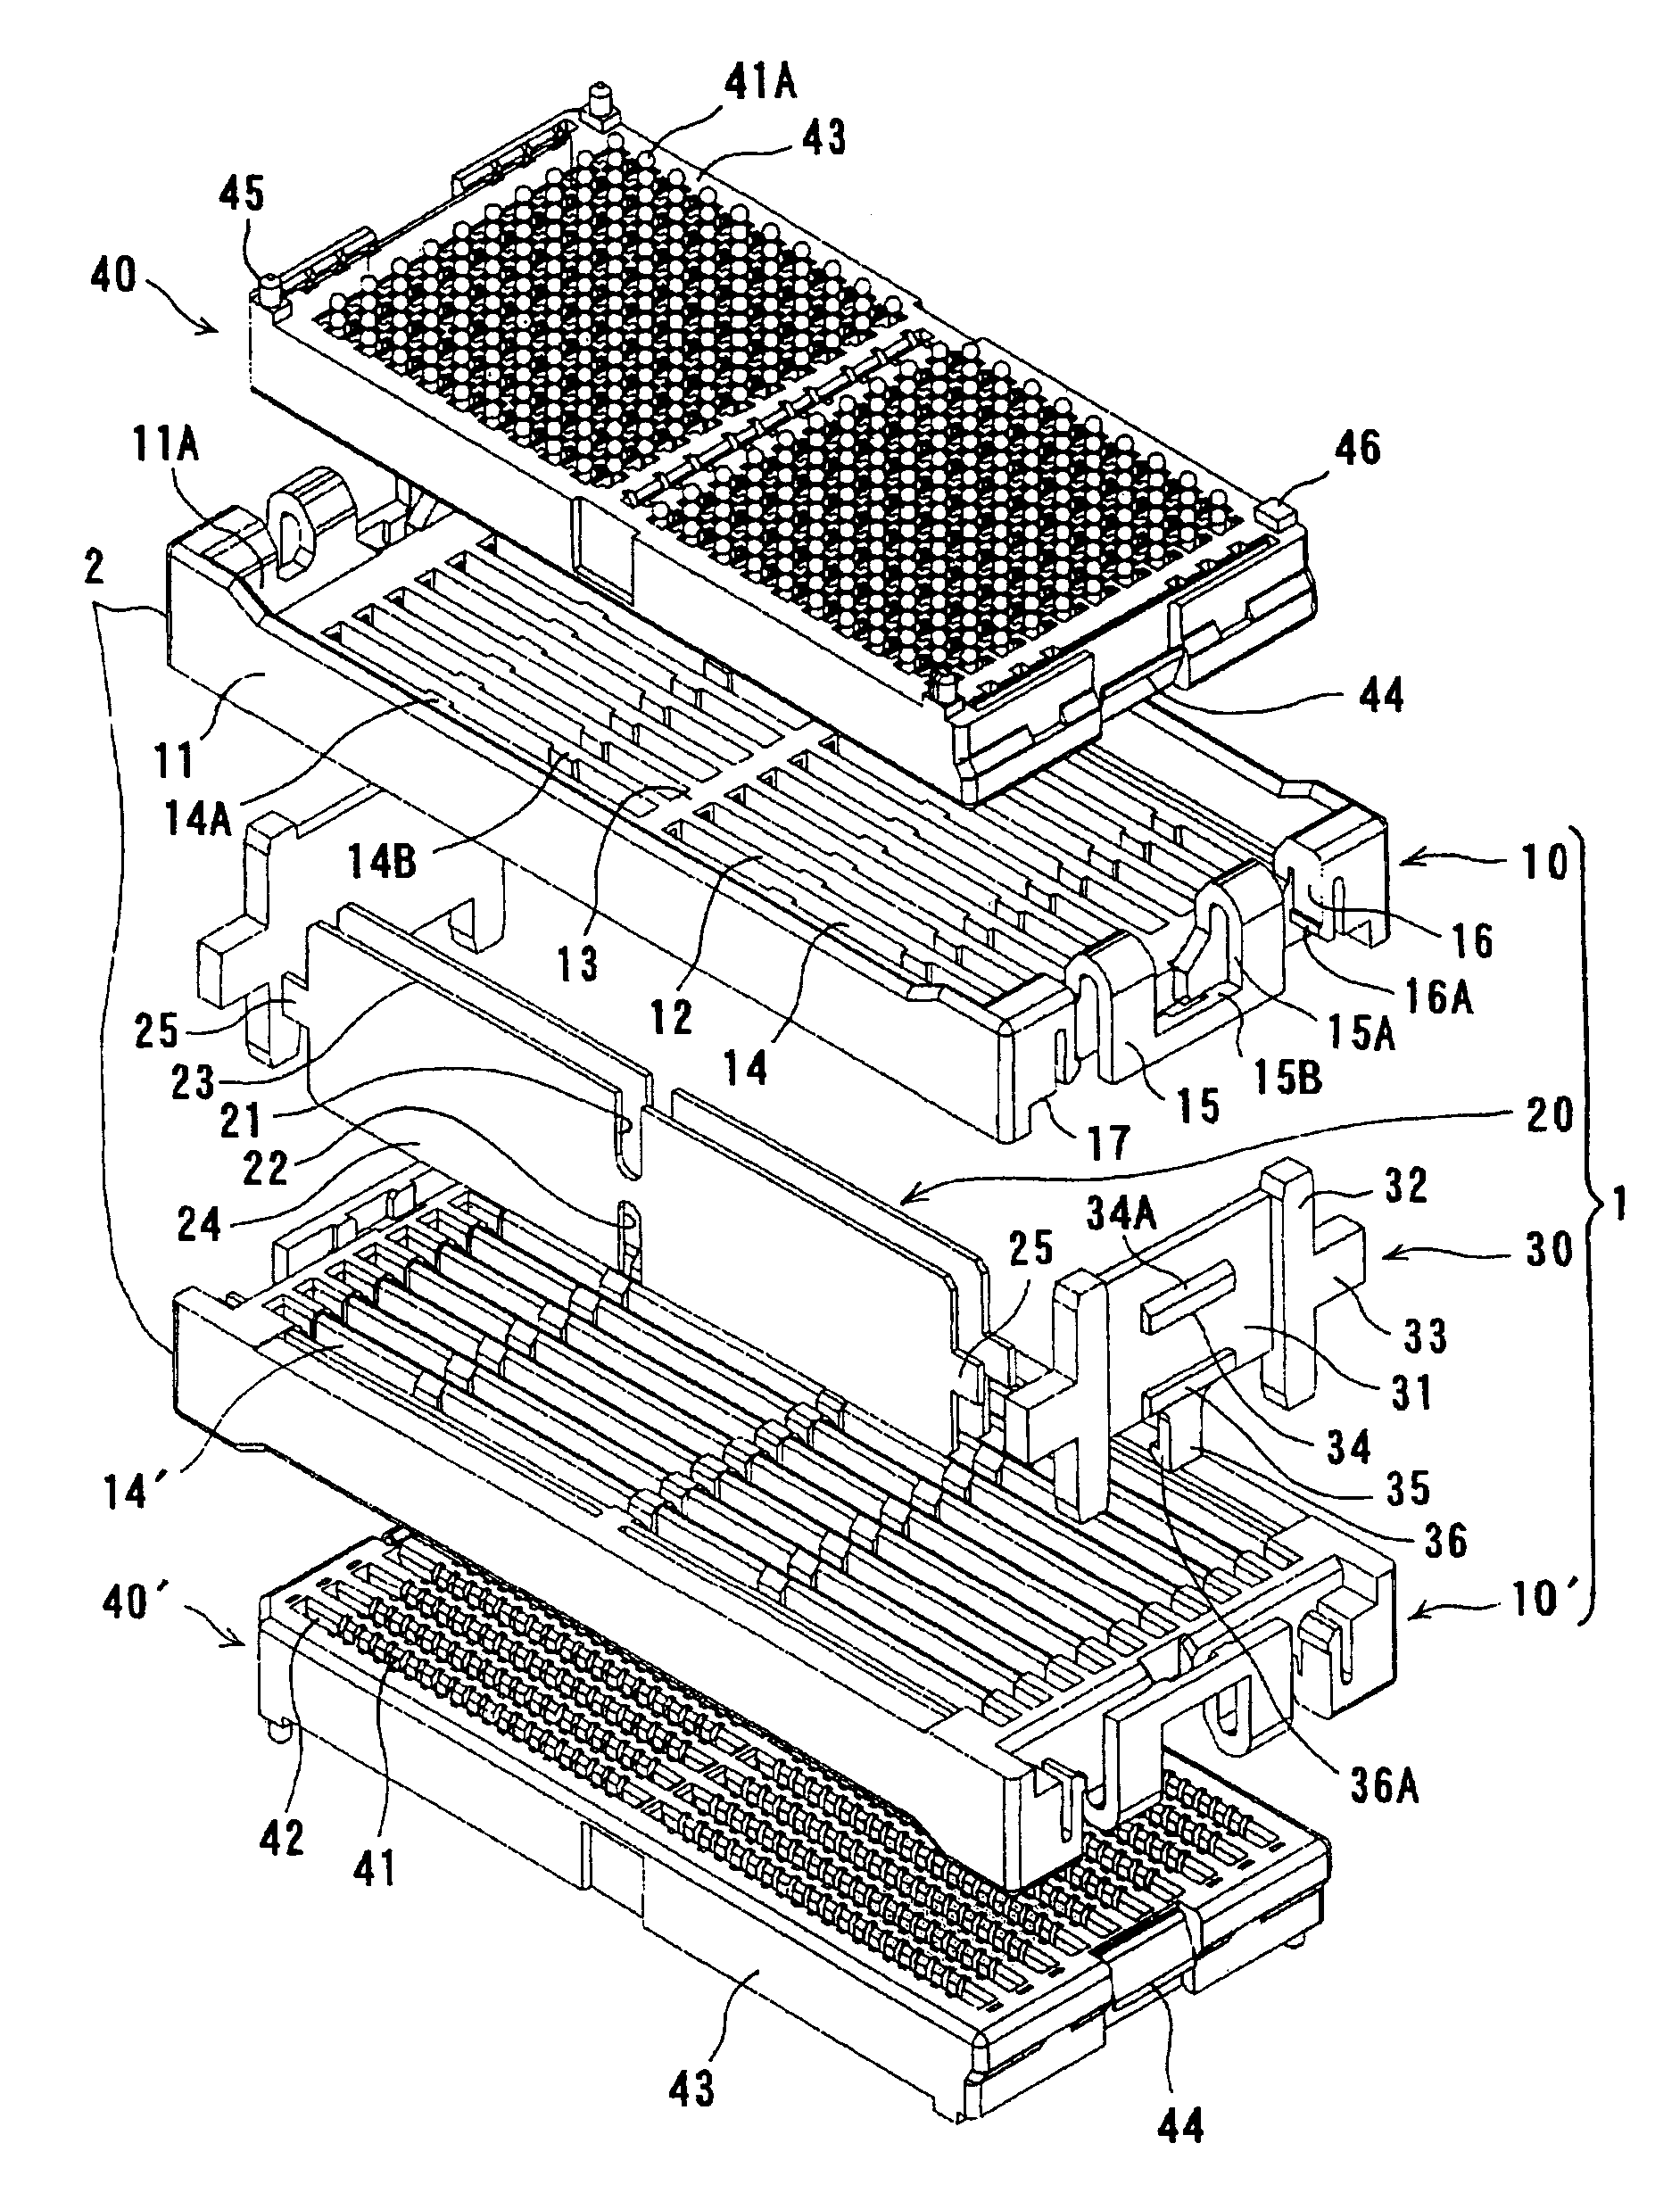 Intermediate electrical connector device and its connecting structure